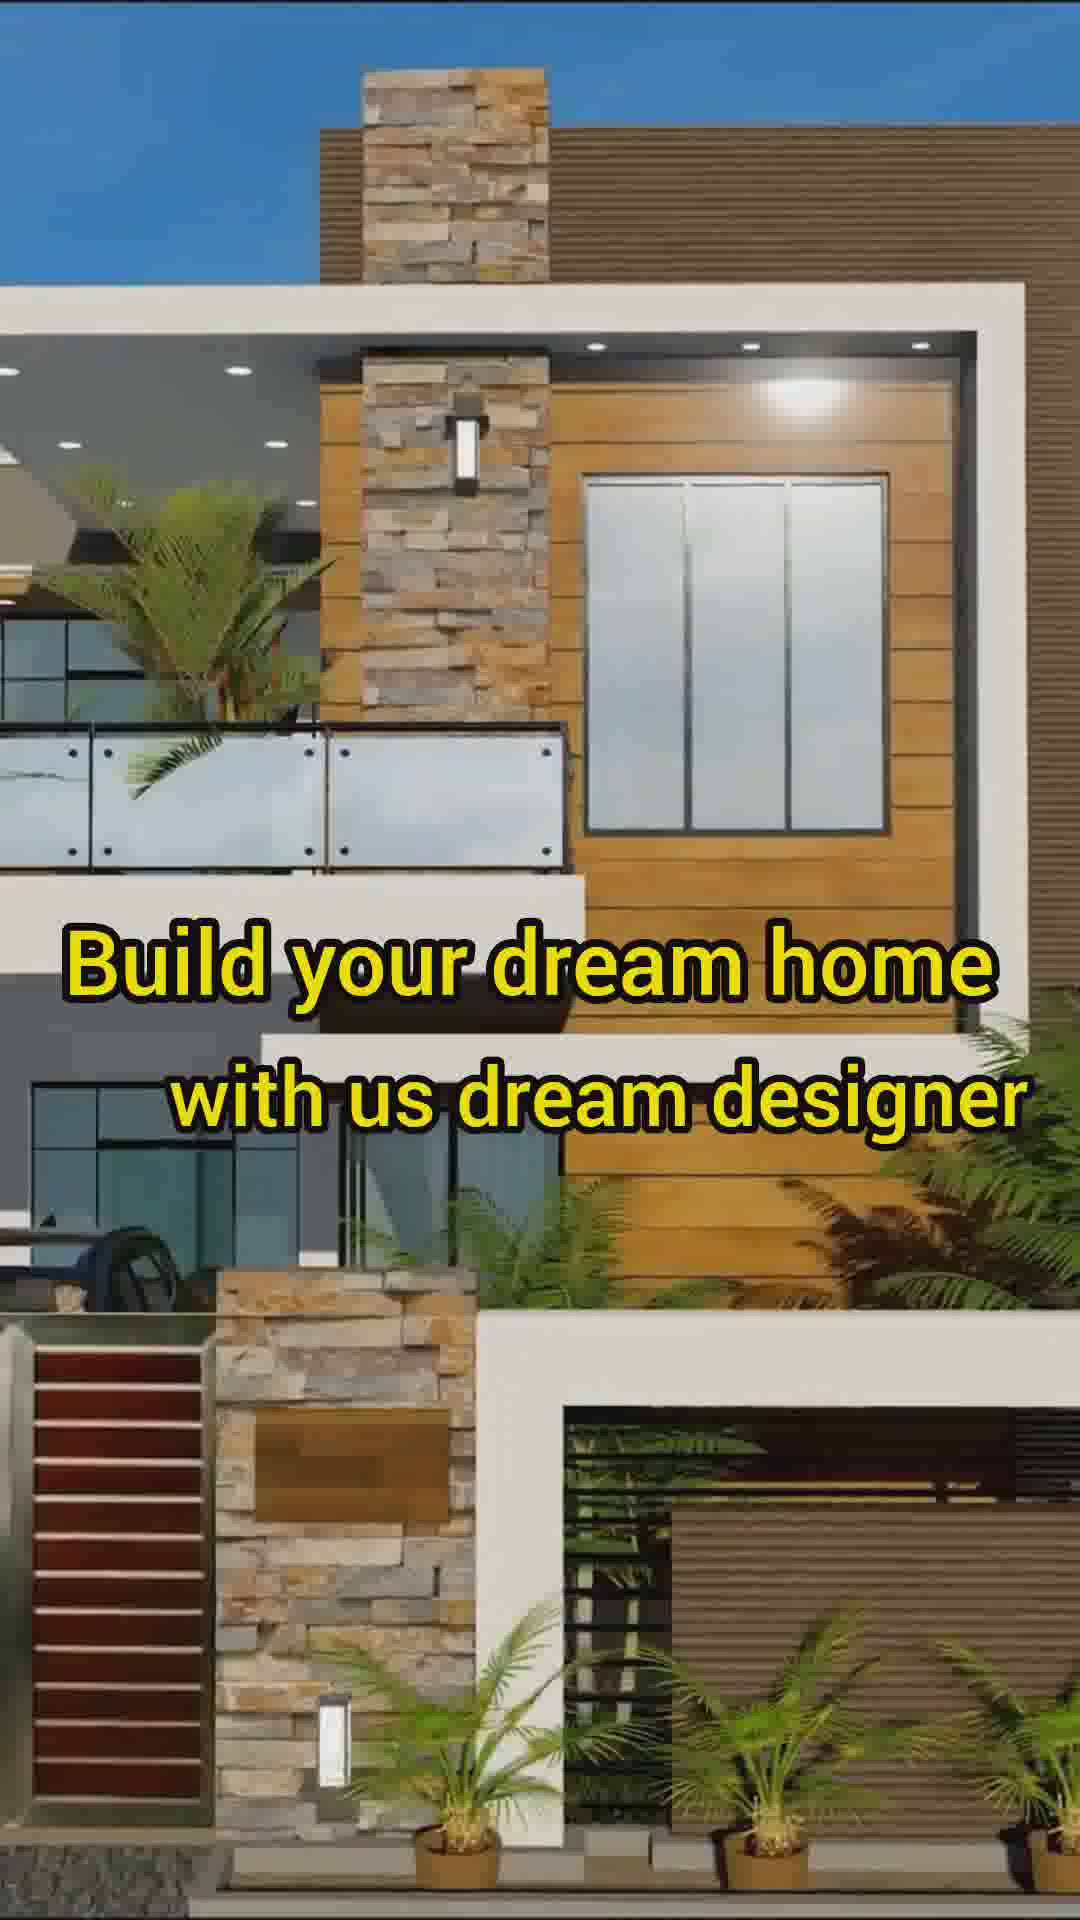 bulid you dream home with us dream designer  #lowcost #BuildwithTataTrust #kolokerala #goodhomes #classichomes #moderndesign #mosquedesign #LUXURY_INTERIOR #luxary